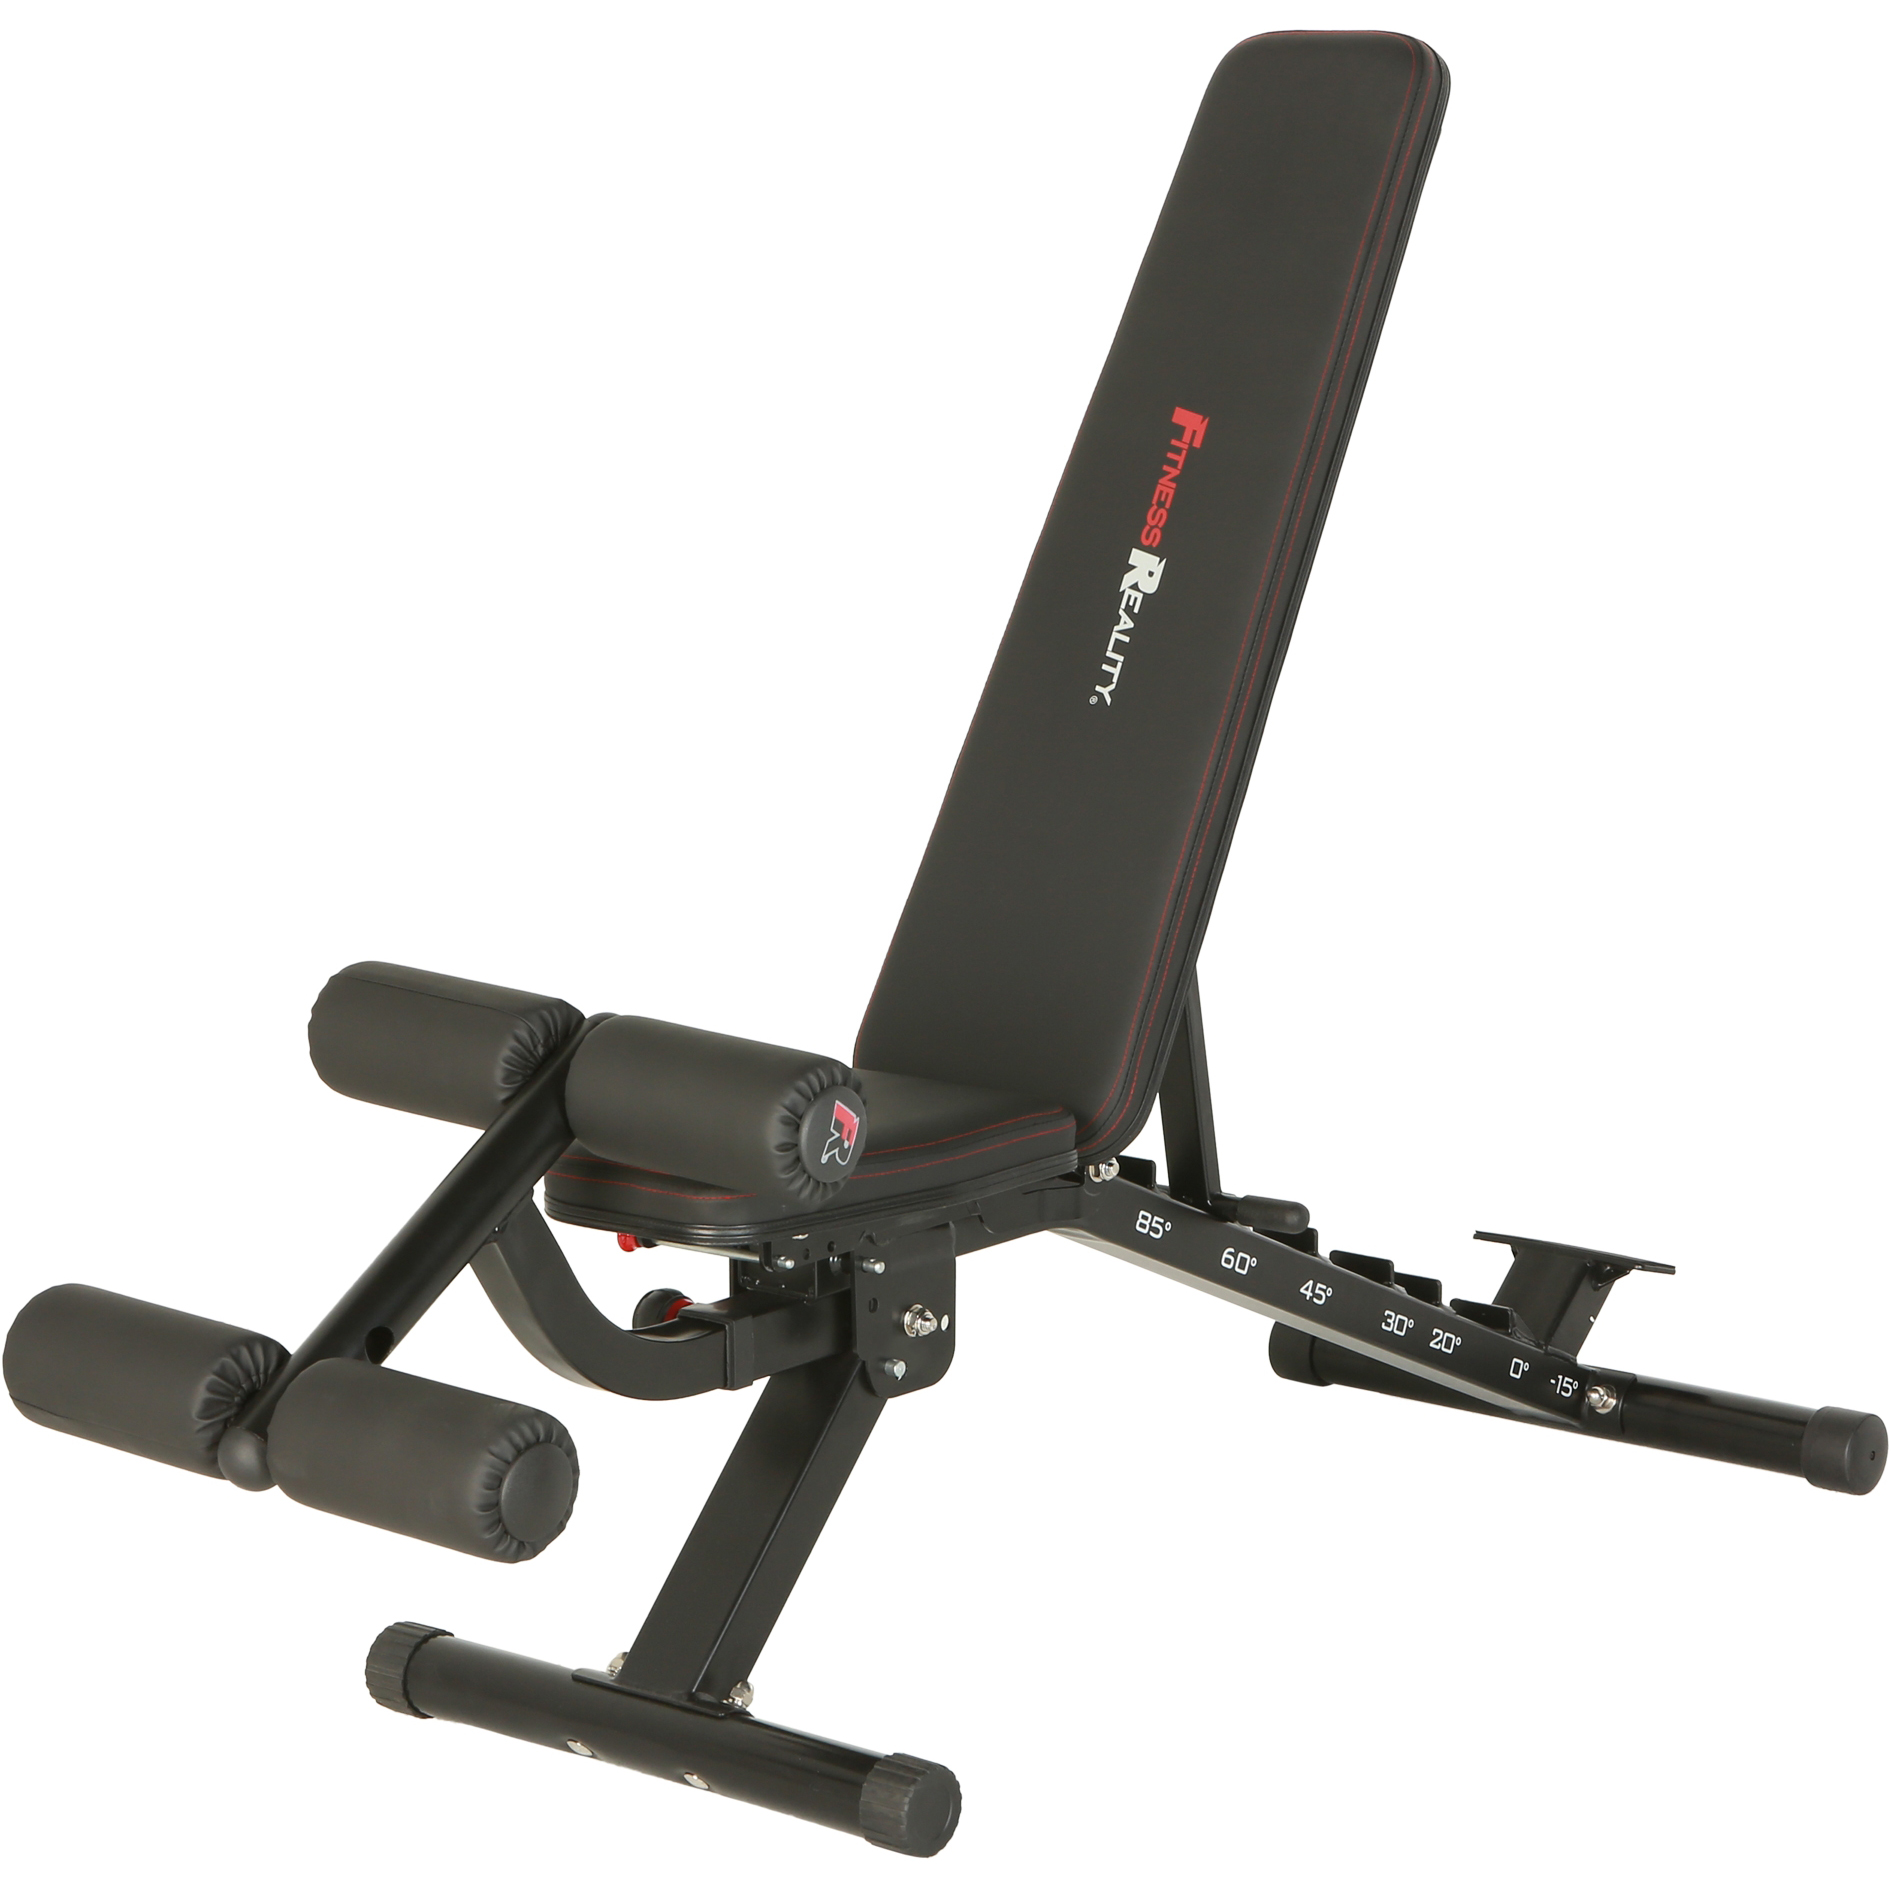 Fitness Reality 2000 Super Max Extra Large Adjustable Utility FID Weight Bench with Detachable Leg Lock-Down - image 1 of 15